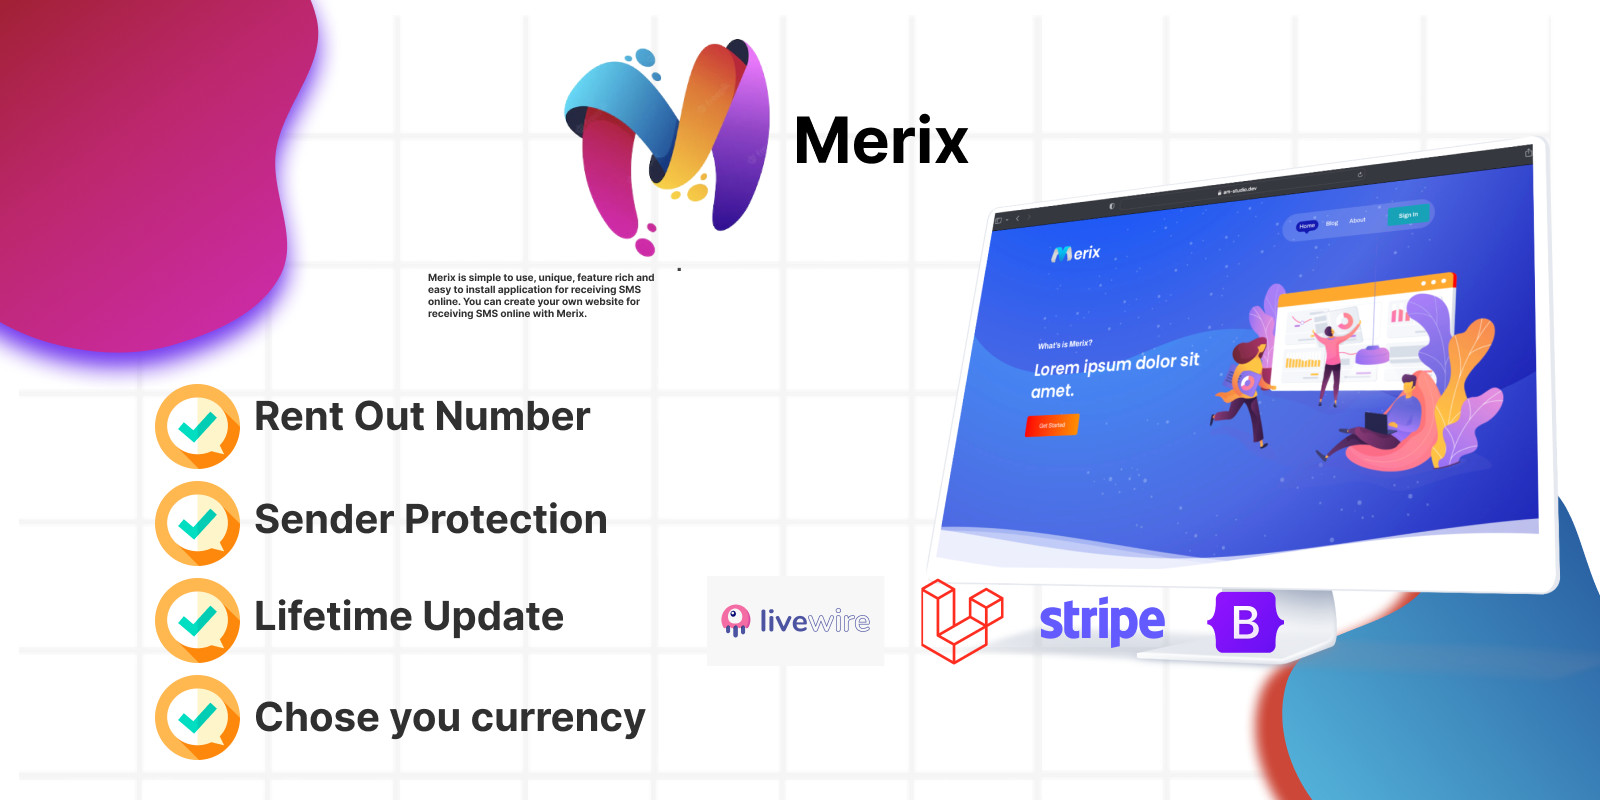 Merix - SMS Temporary Online System